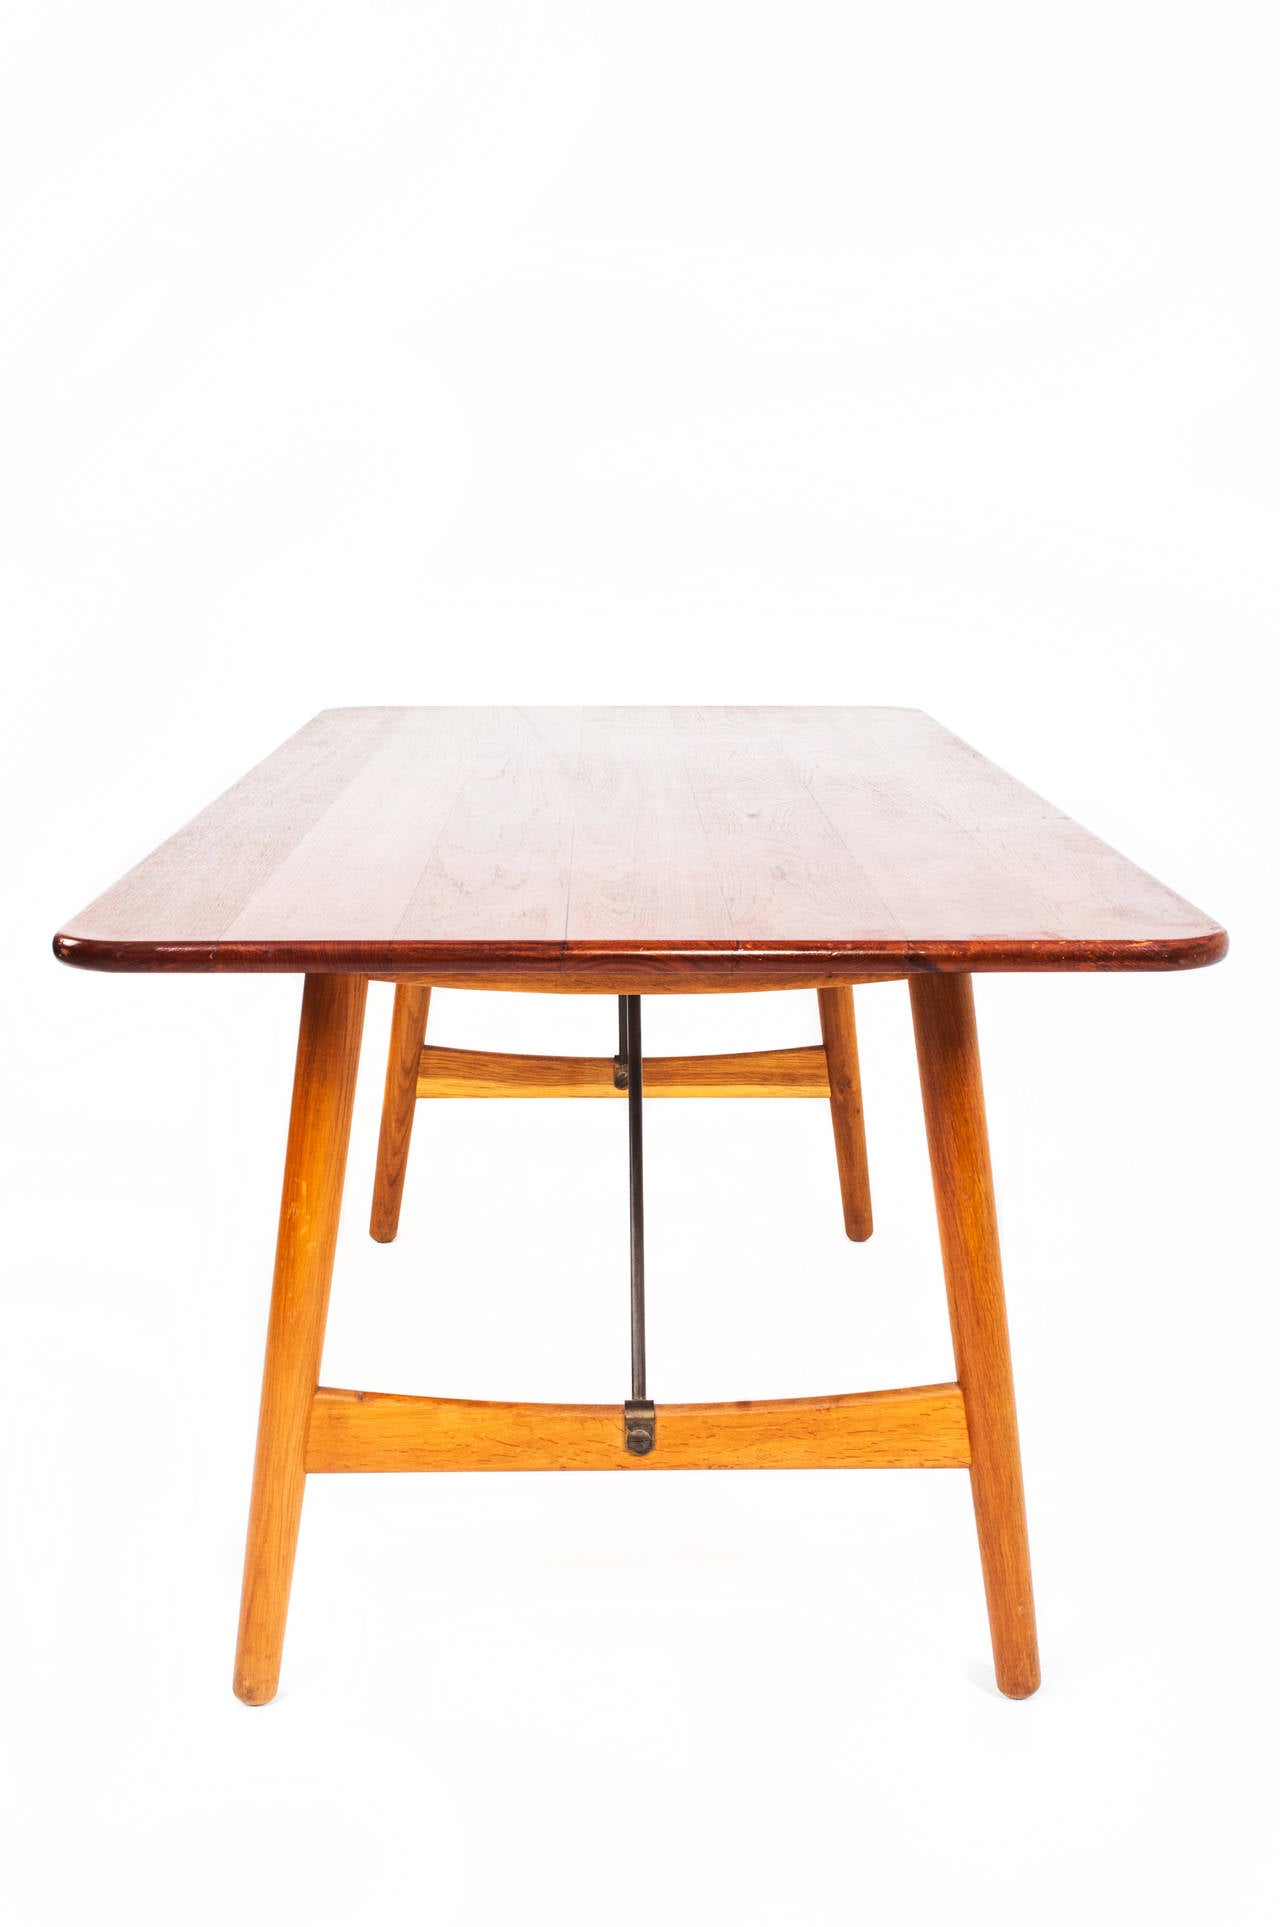 Børge Mogensen. Hunting table. 
Massive teak top with rounded corners. Solid oak base with brass bars.

Designed in 1950. 
Produced by Søborg Møbelfabrik

Measures: H 72, L 180, W 90 cm.